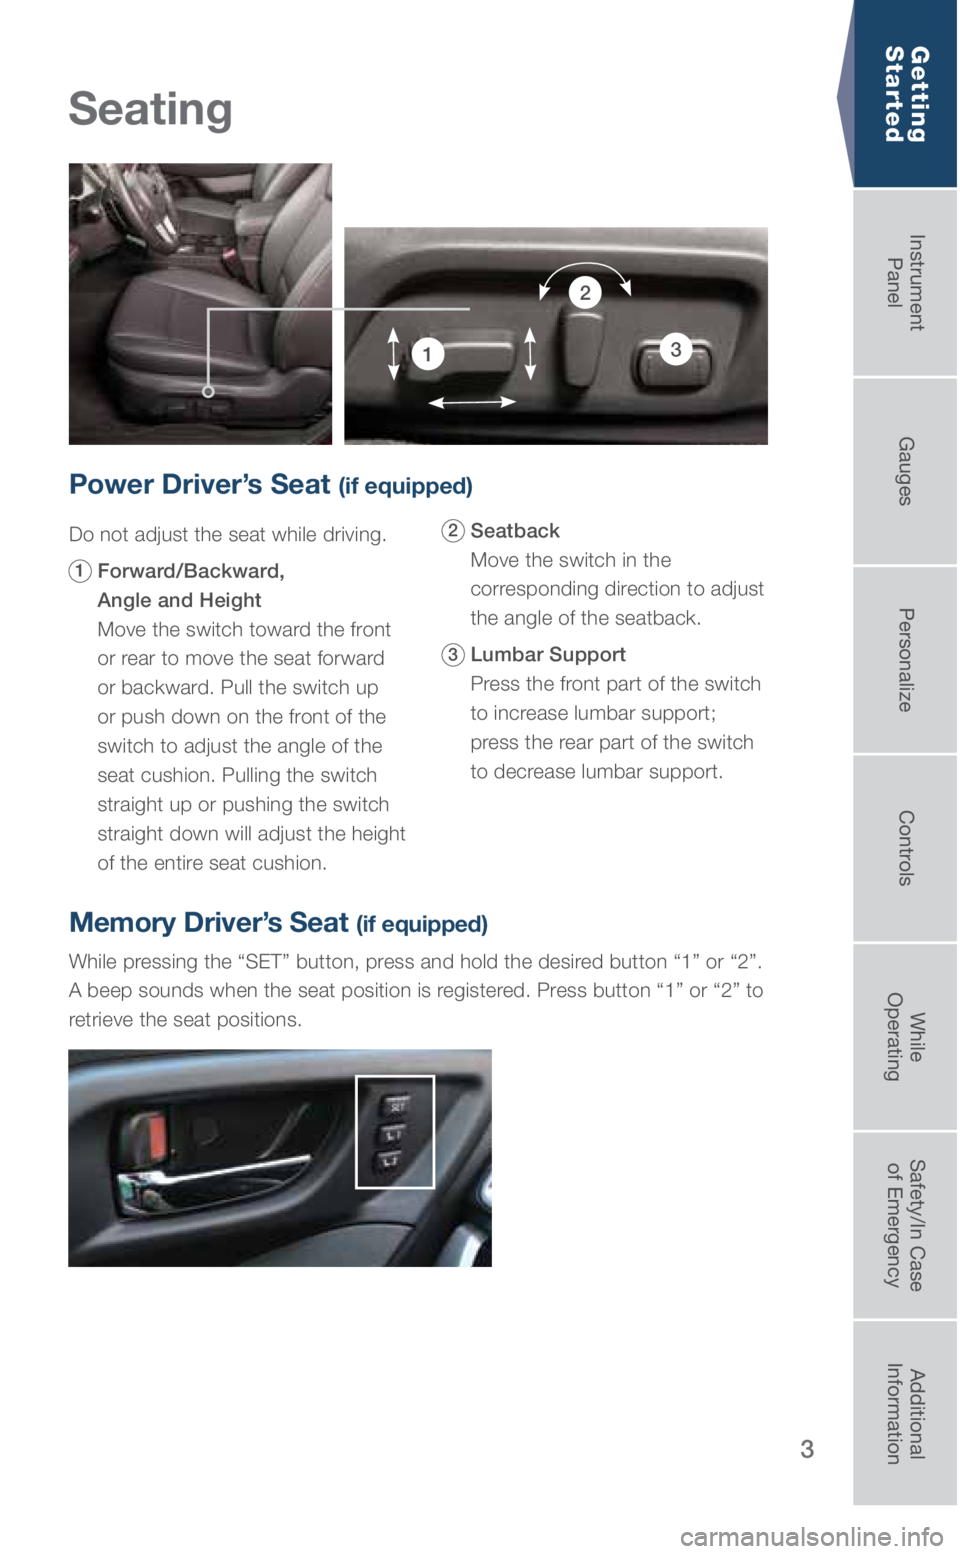 SUBARU LEGACY 2019  Quick Guide 3
Seating
Getting  
Started
Power Driver’s Seat (if equipped)
Do not adjust the seat while driving.
1   Forward/Backward,   
Angle and Height  
 
Move the switch toward the front 
or rear to move th